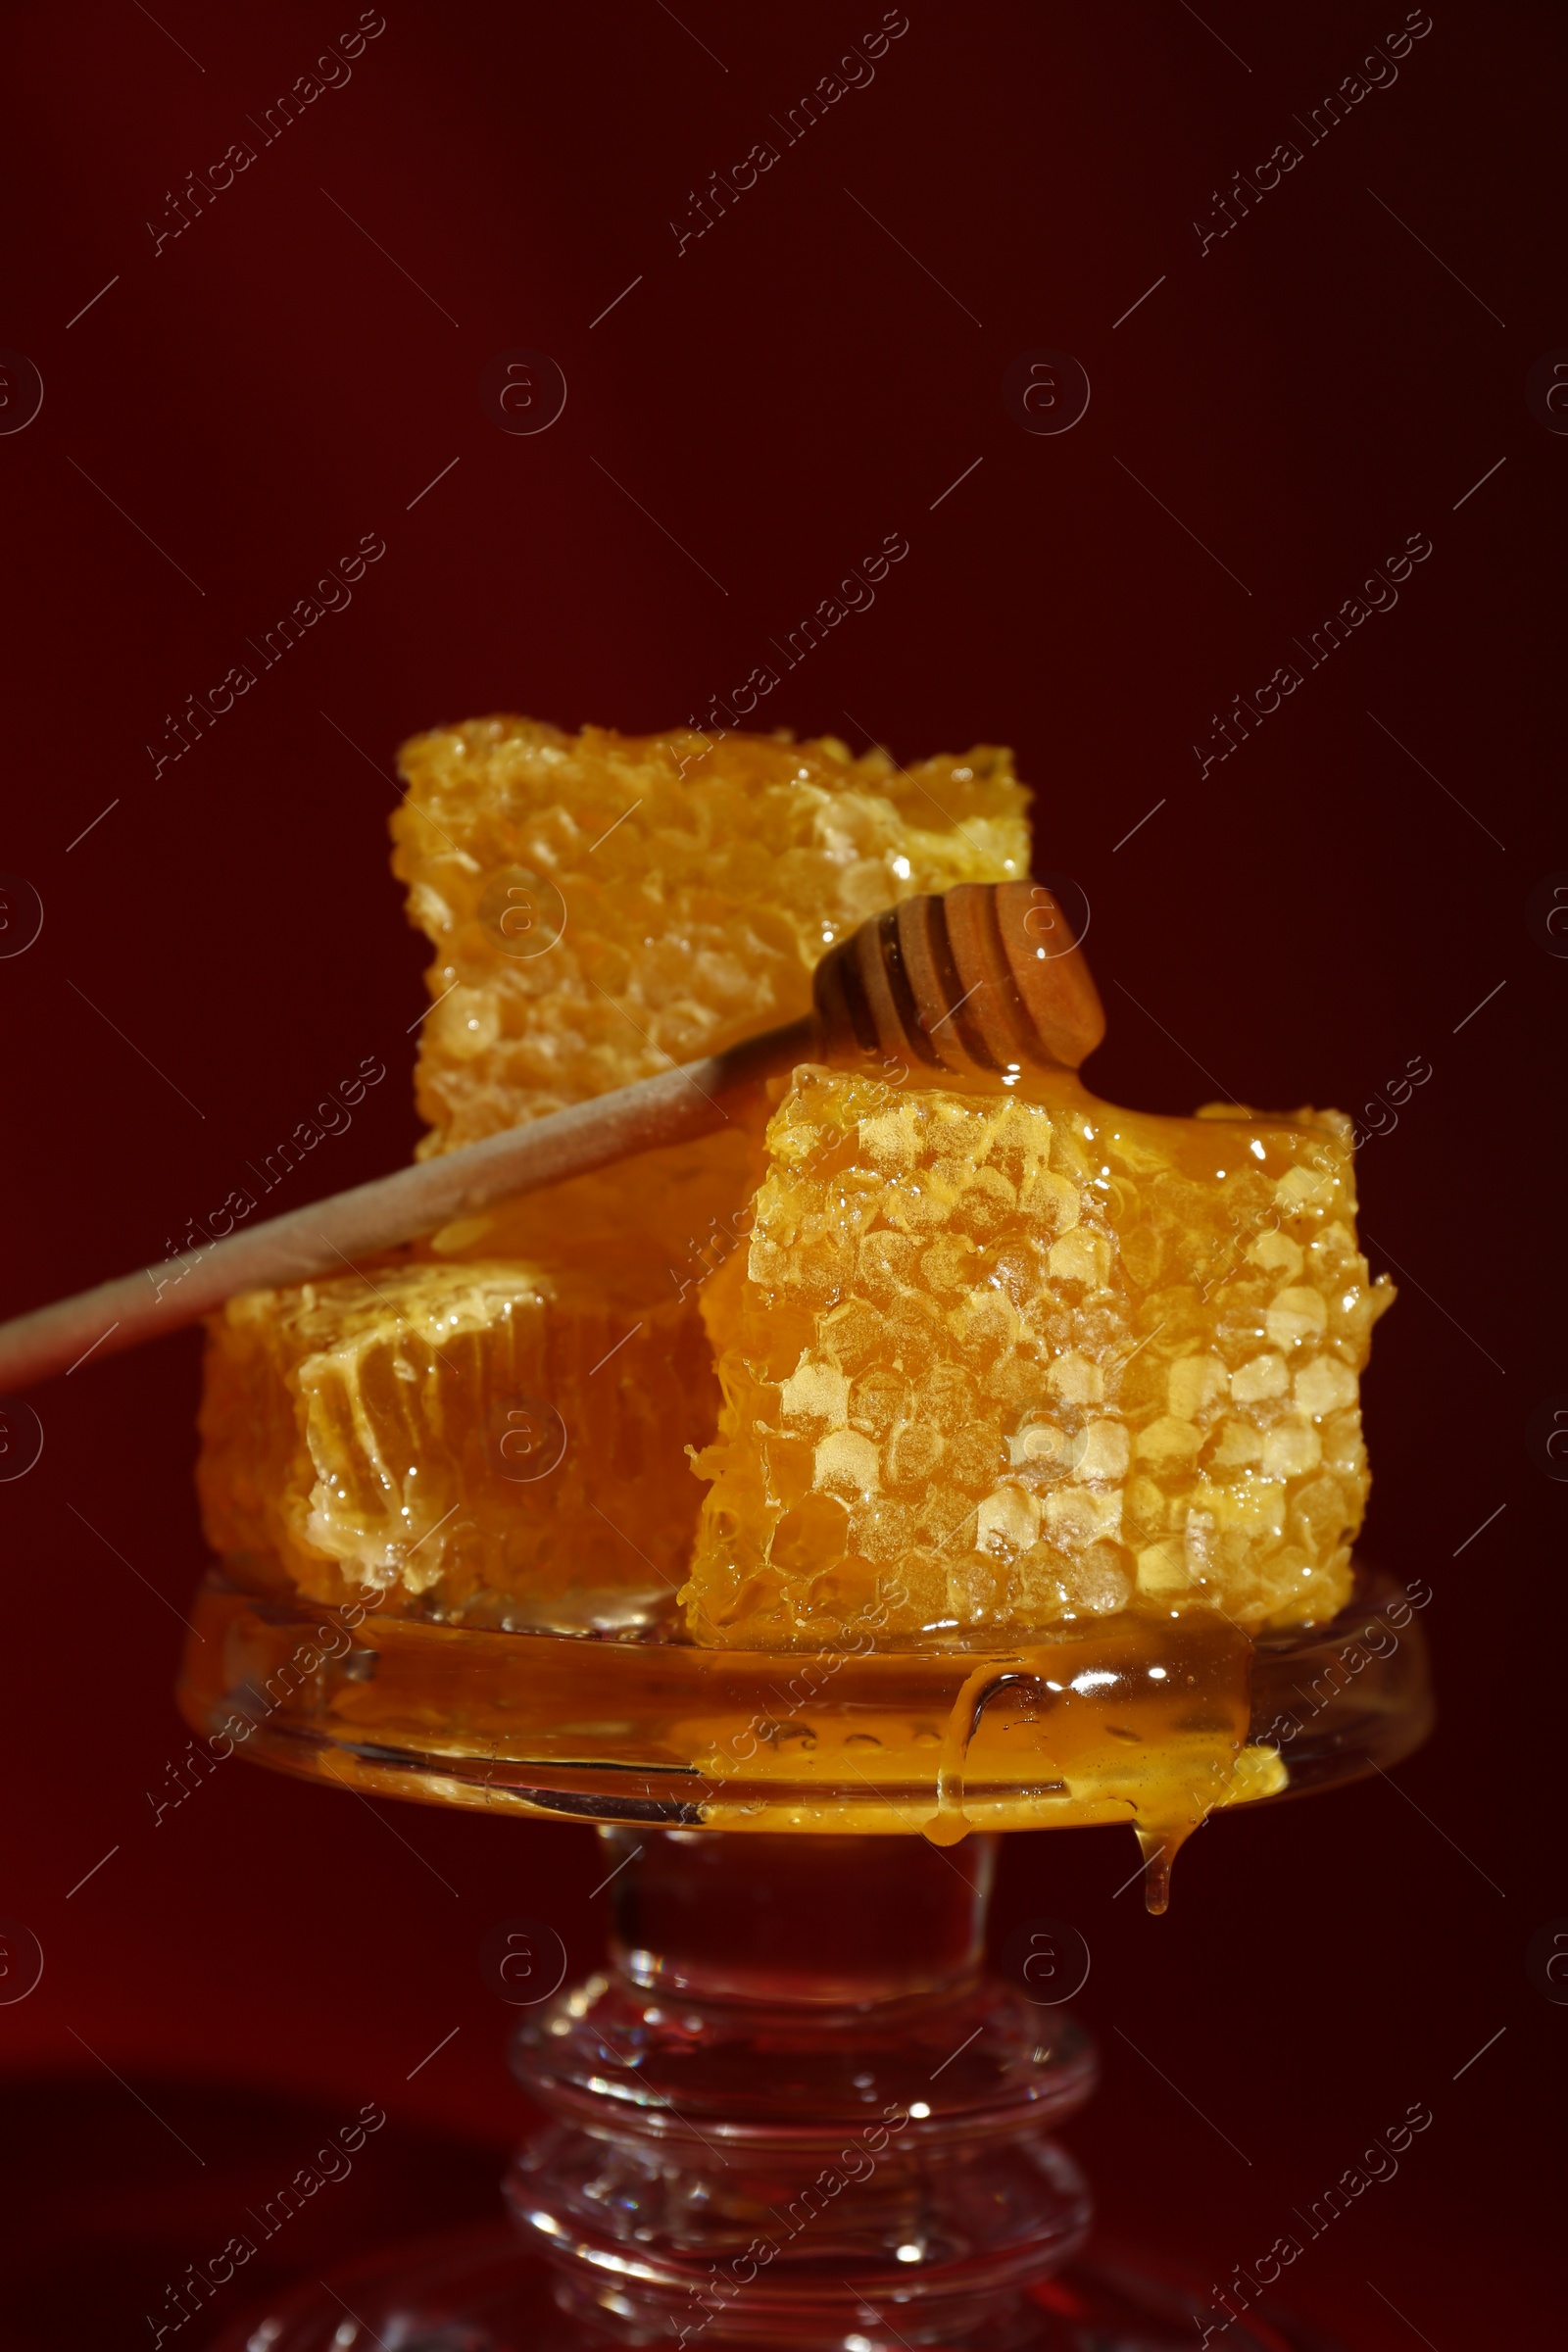 Photo of Natural honeycombs and wooden dipper on glass stand against burgundy background